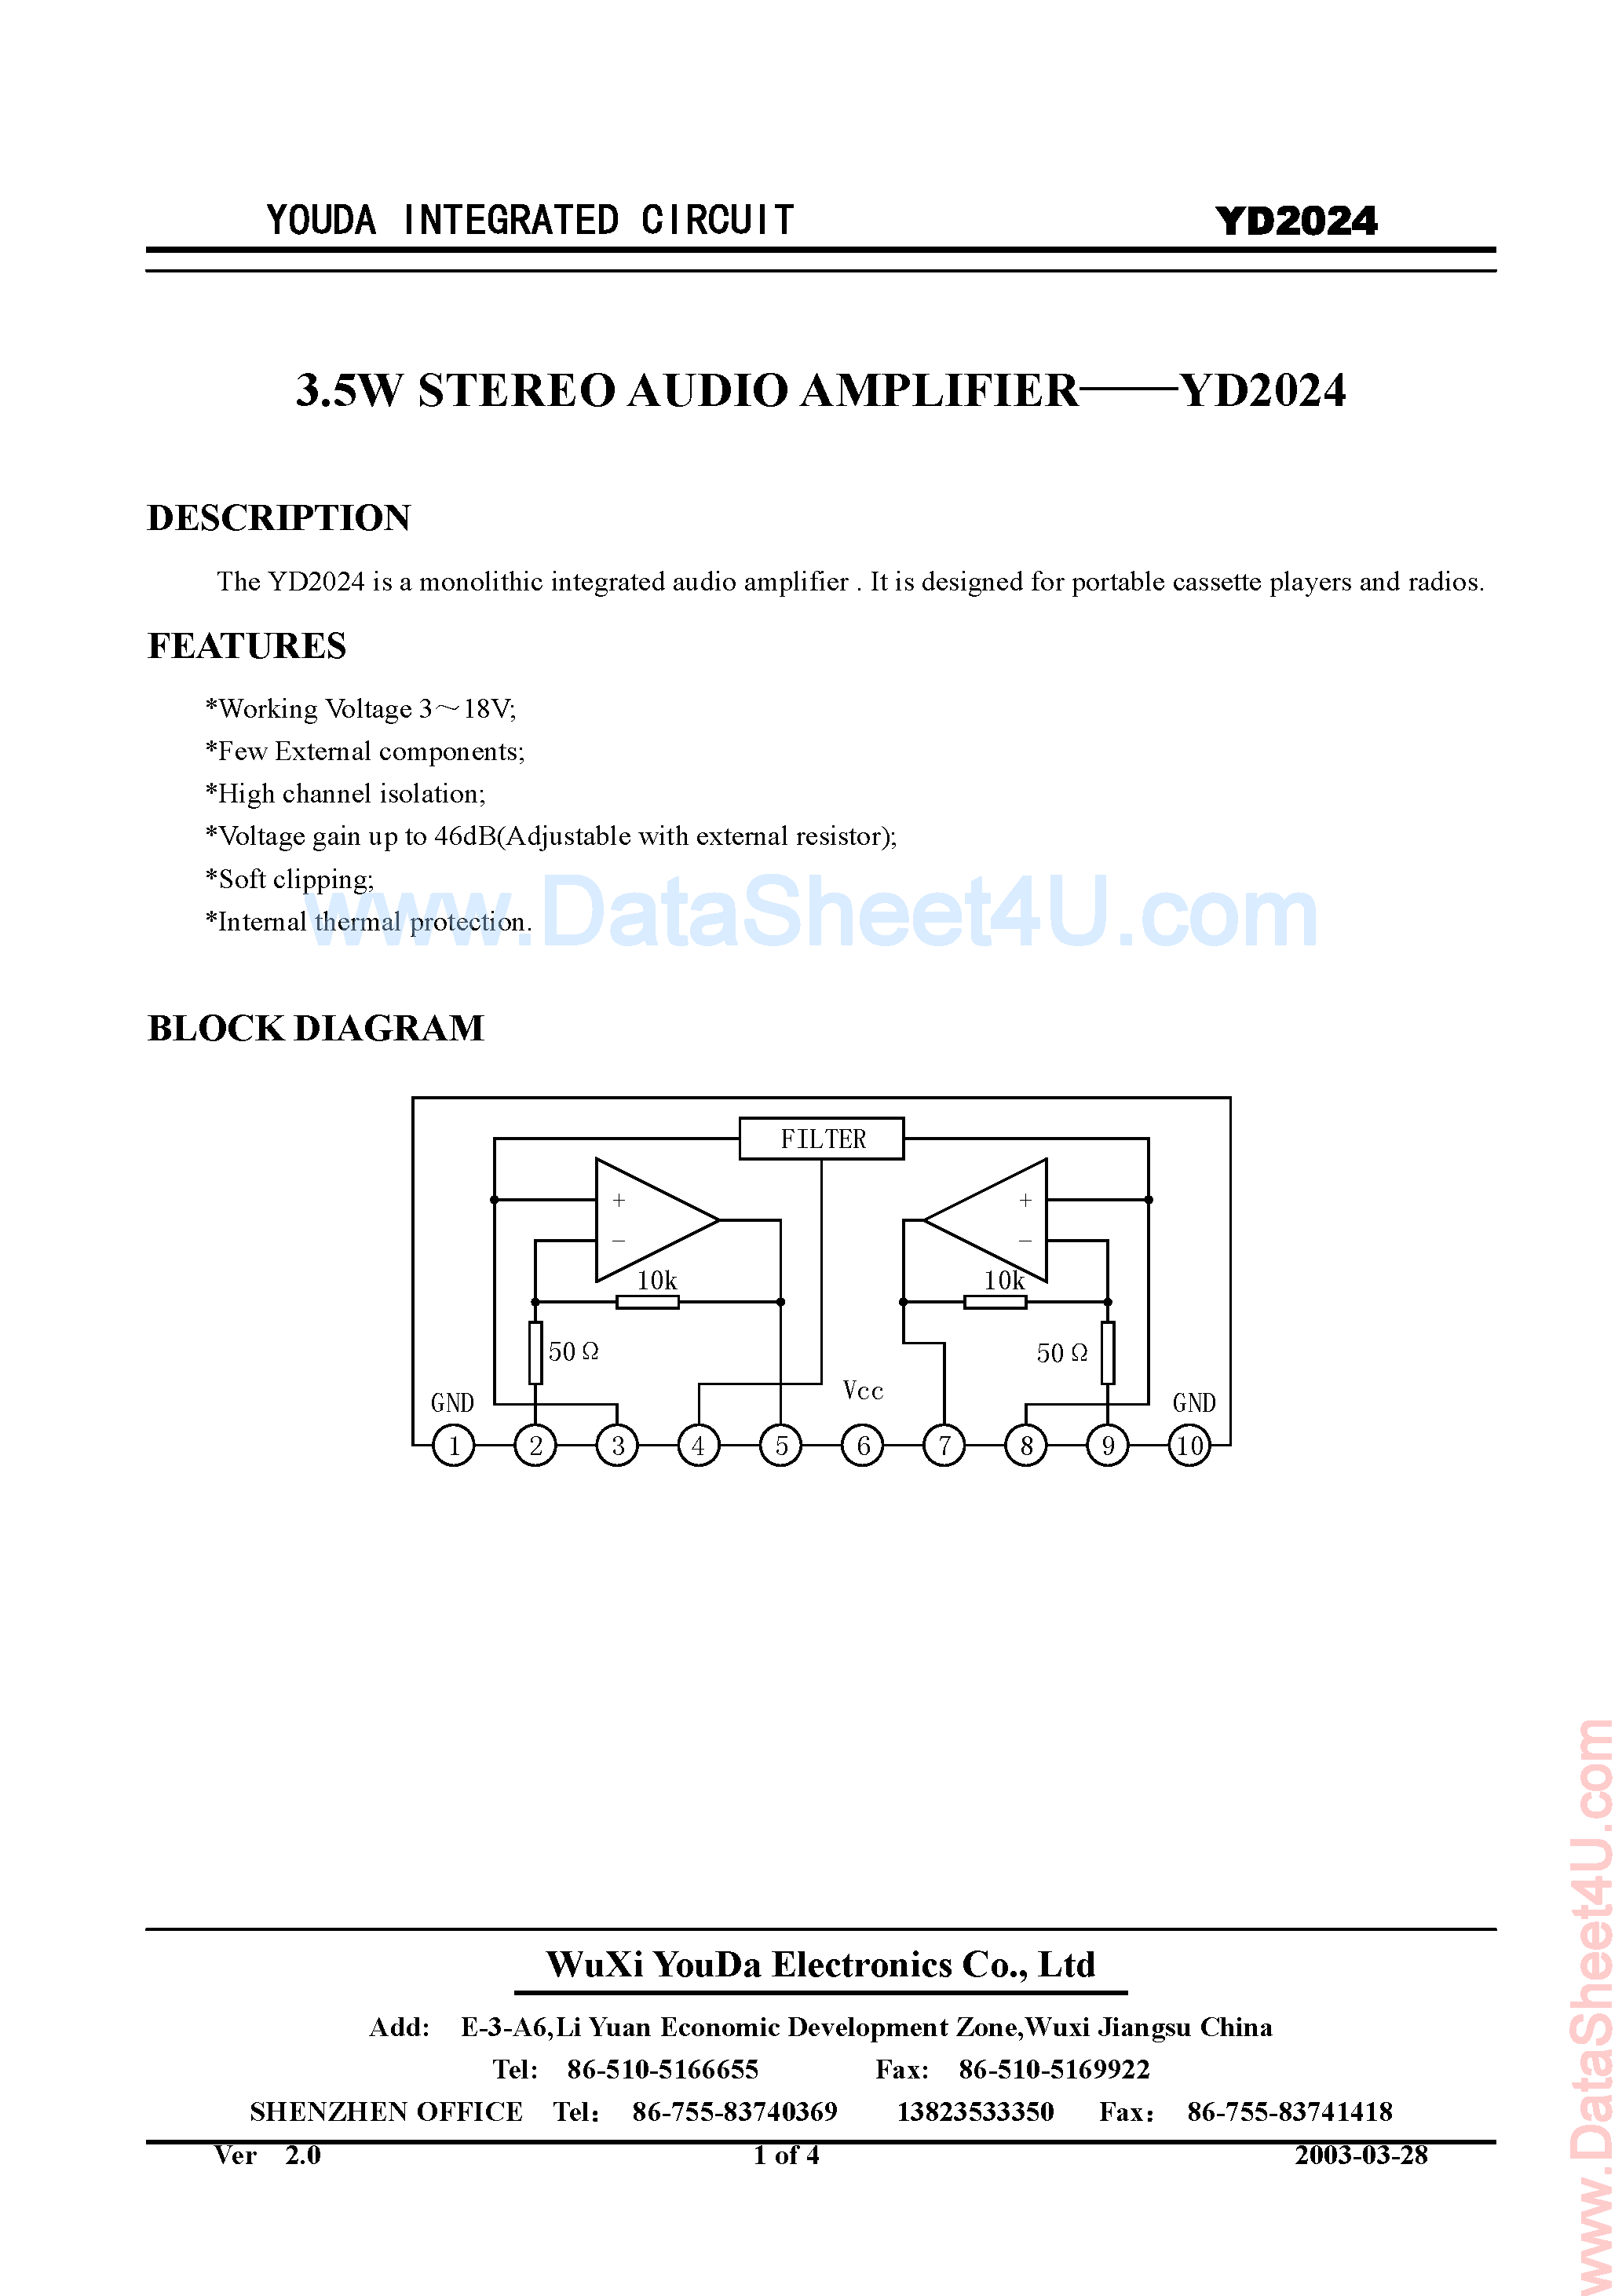 Datasheet YD2024 - 3.5W Stereo Audio Amplifier page 1